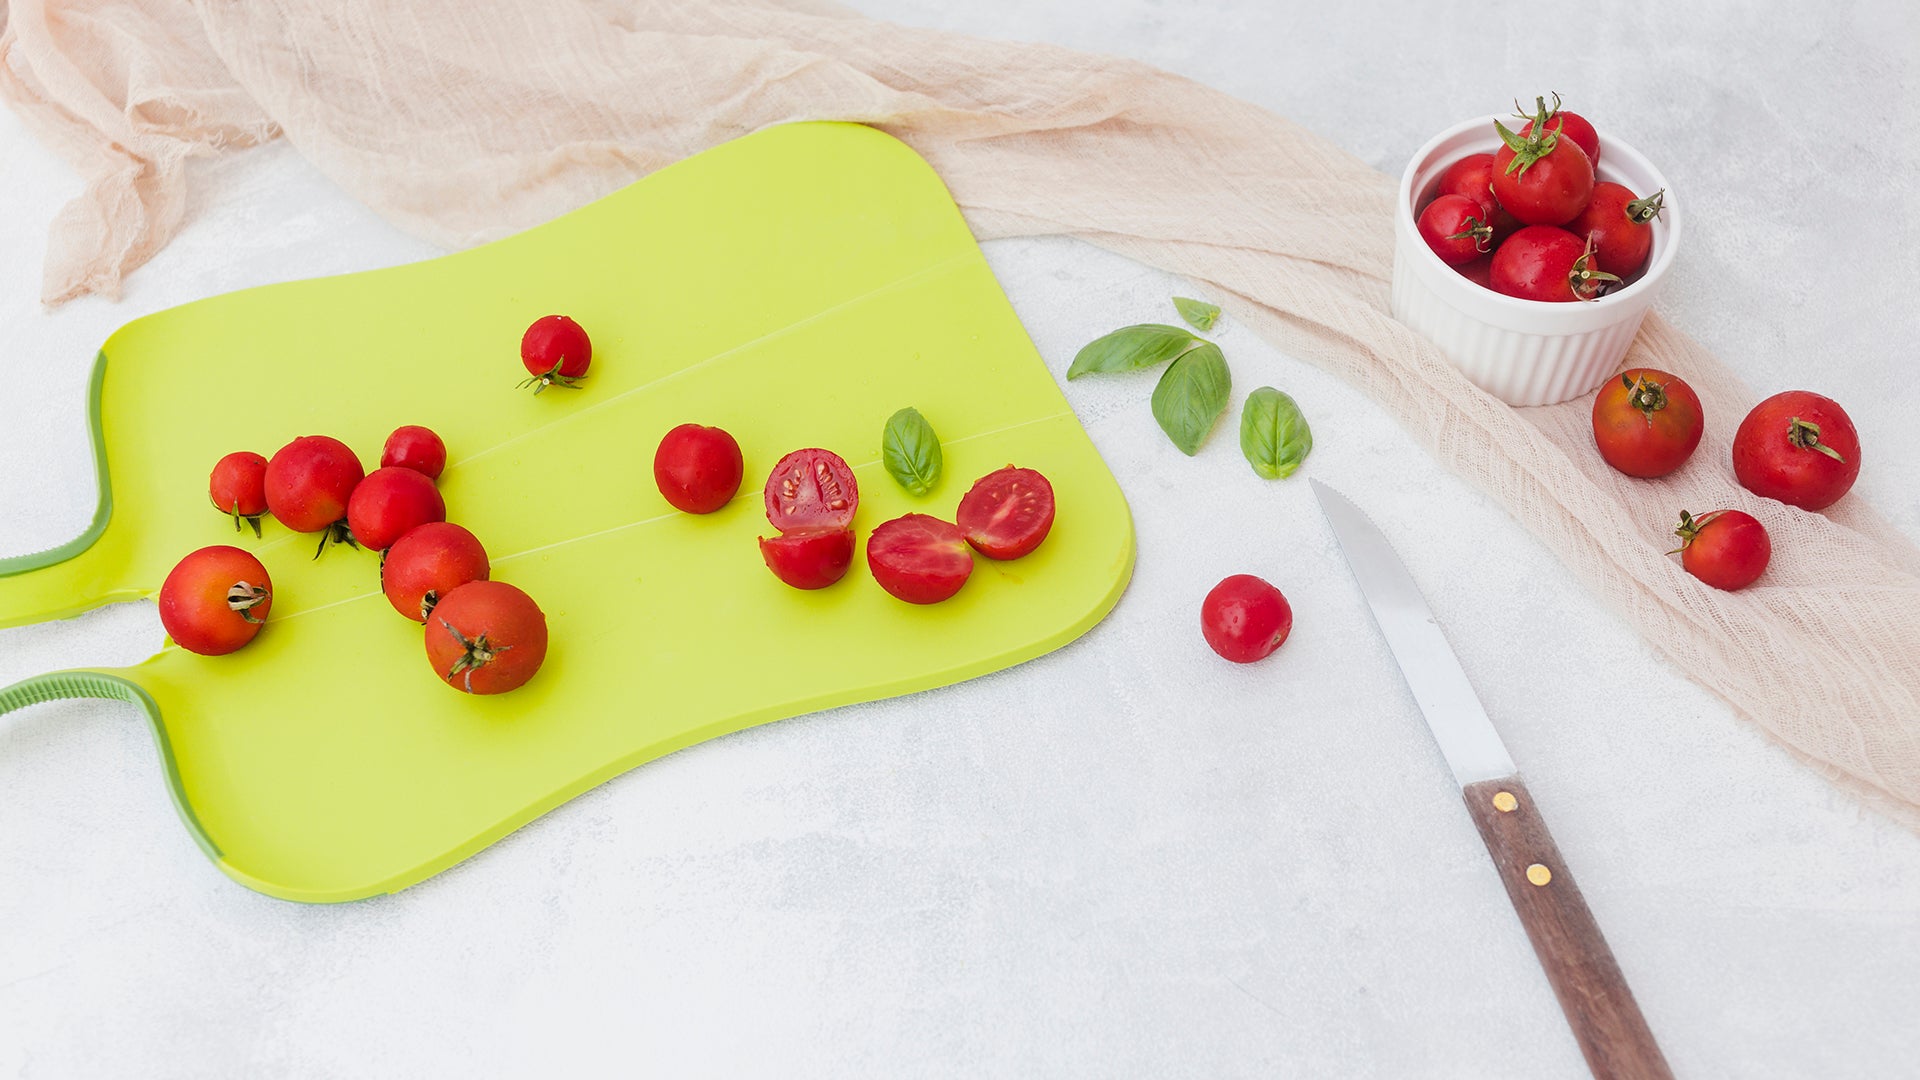 10 Best Dishwasher Safe Cutting Boards, According to Our Tests